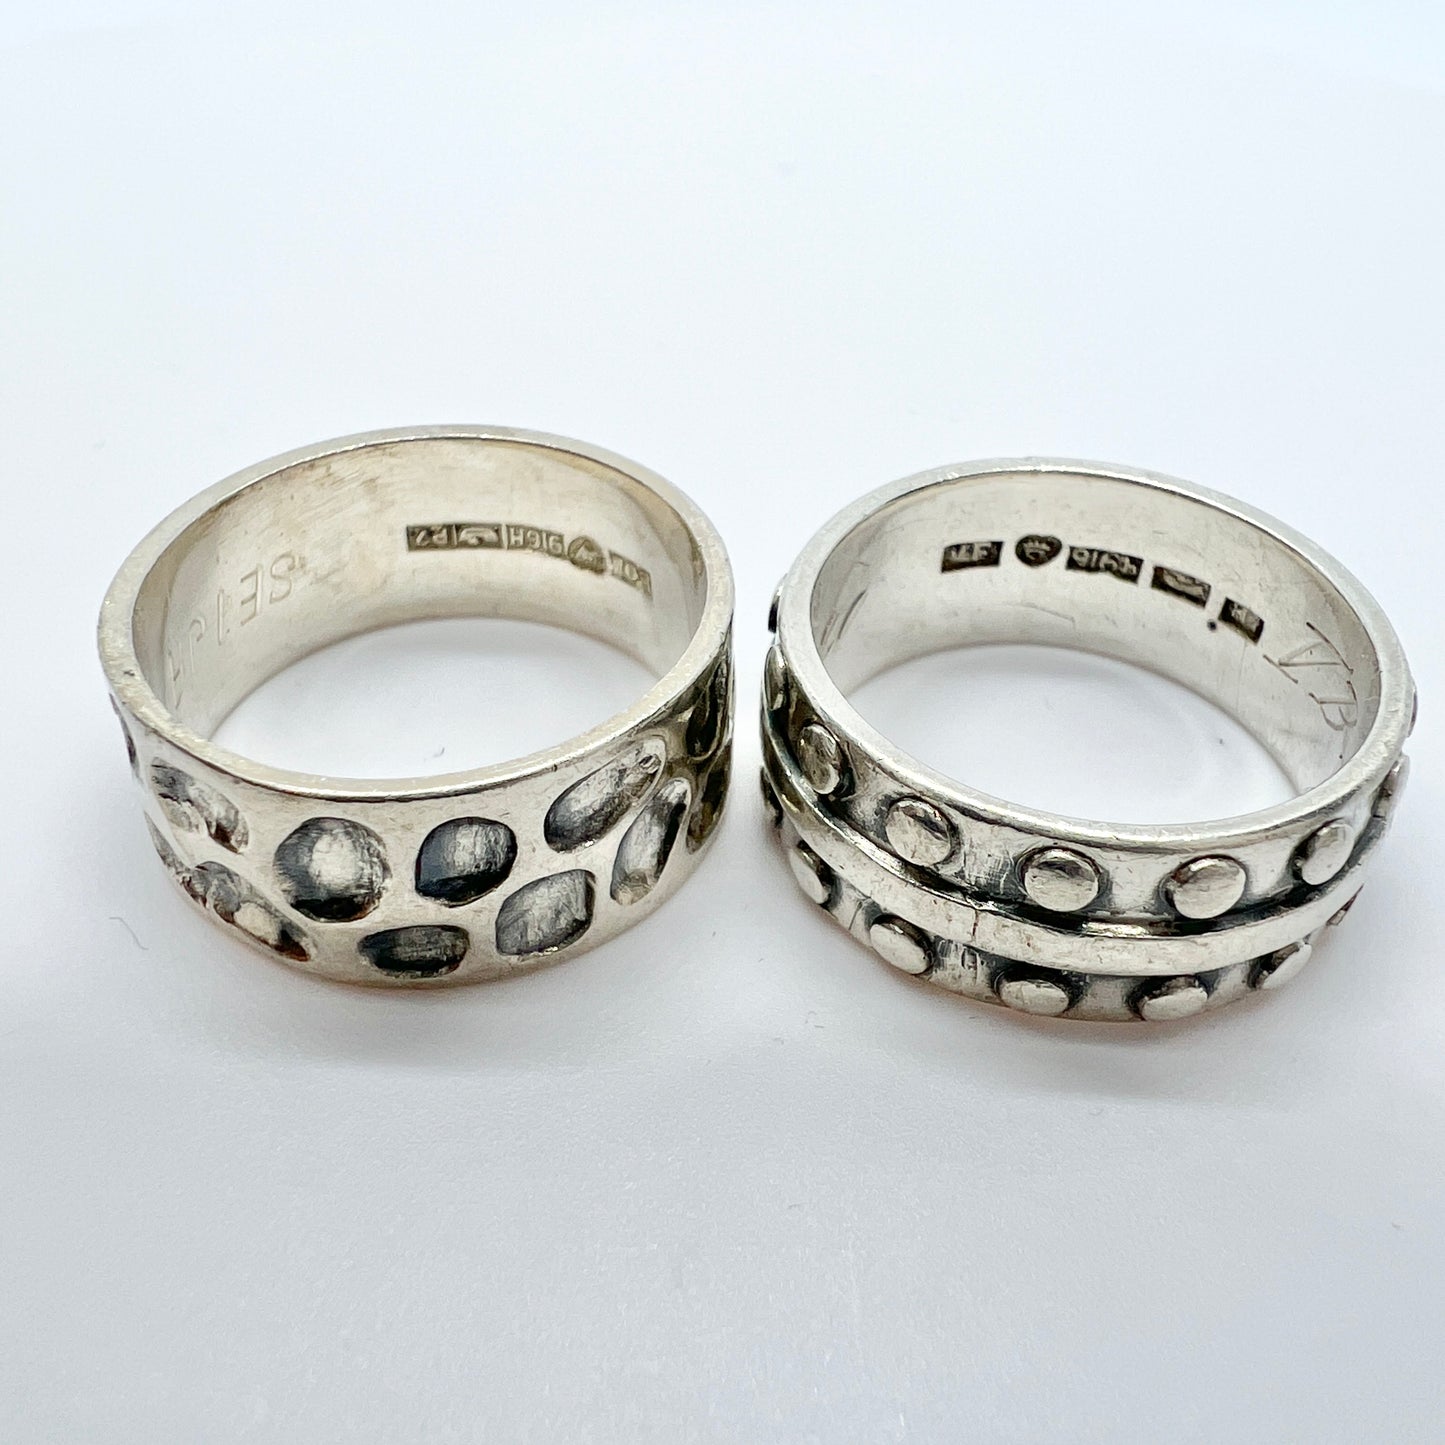 Two Vintage 1960s Solid Silver Finnish Silver Band Ring. Size 8 1/4.